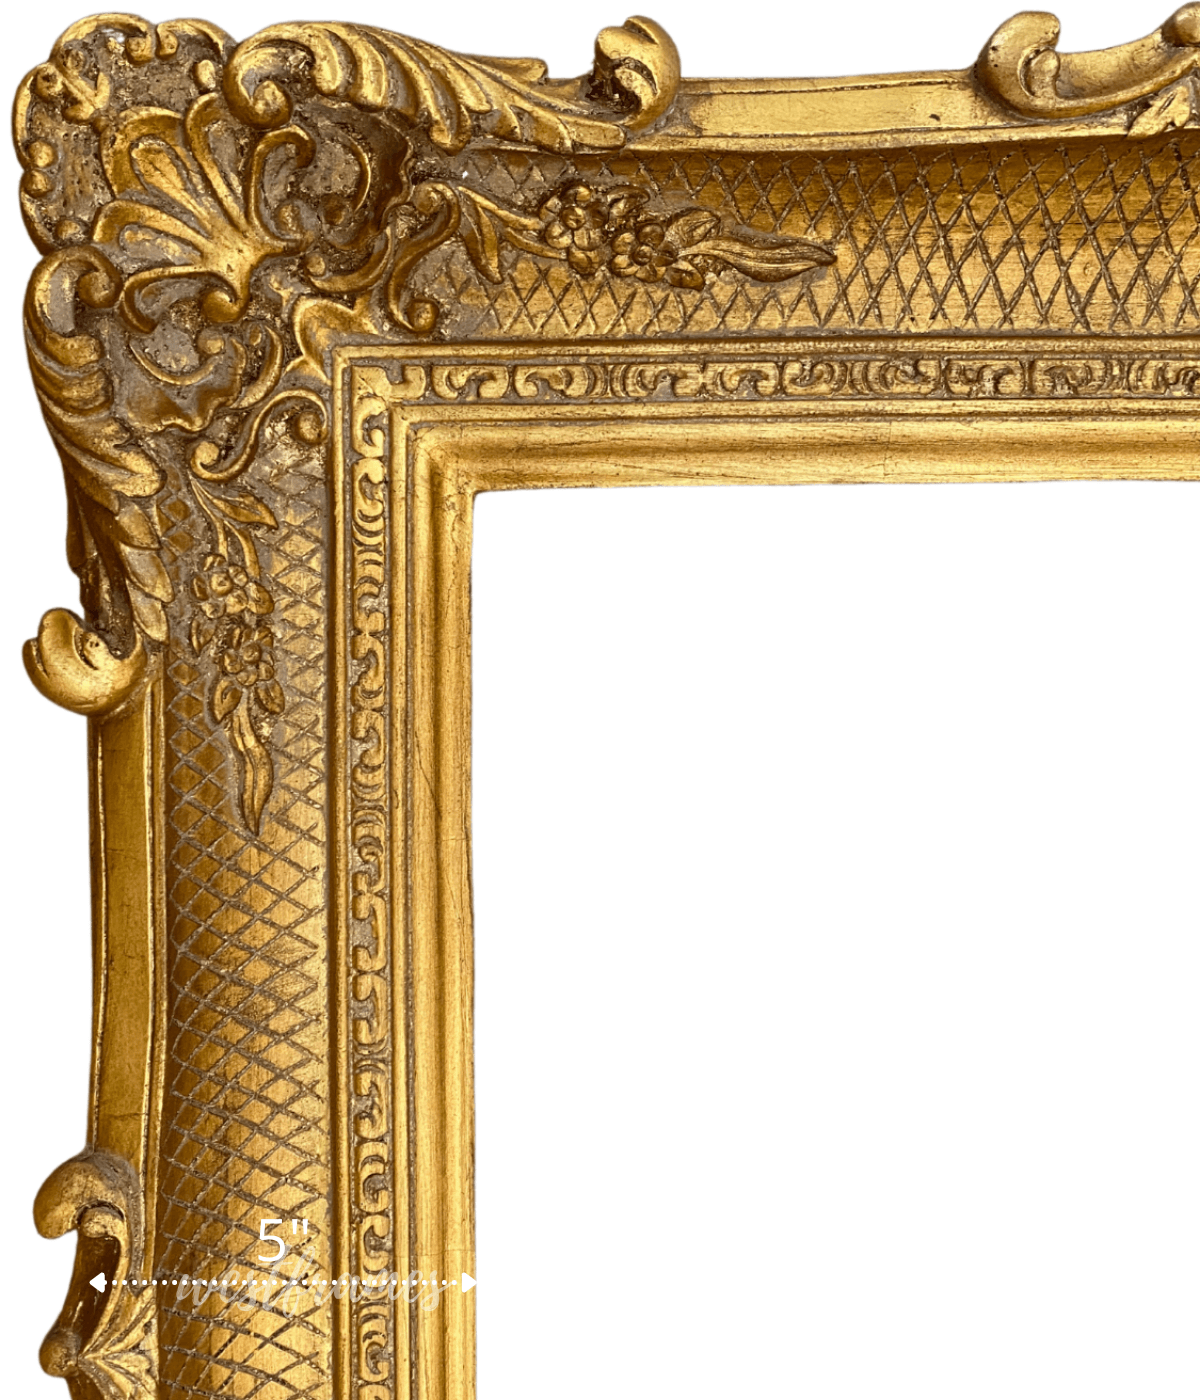 https://westframes.com/cdn/shop/files/napoleon-french-baroque-rococo-ornate-wood-wall-picture-frame-gold-5-wide-west-frames-2_b87c2d72-134a-436a-a342-7497d79e3cb8.png?v=1688770498